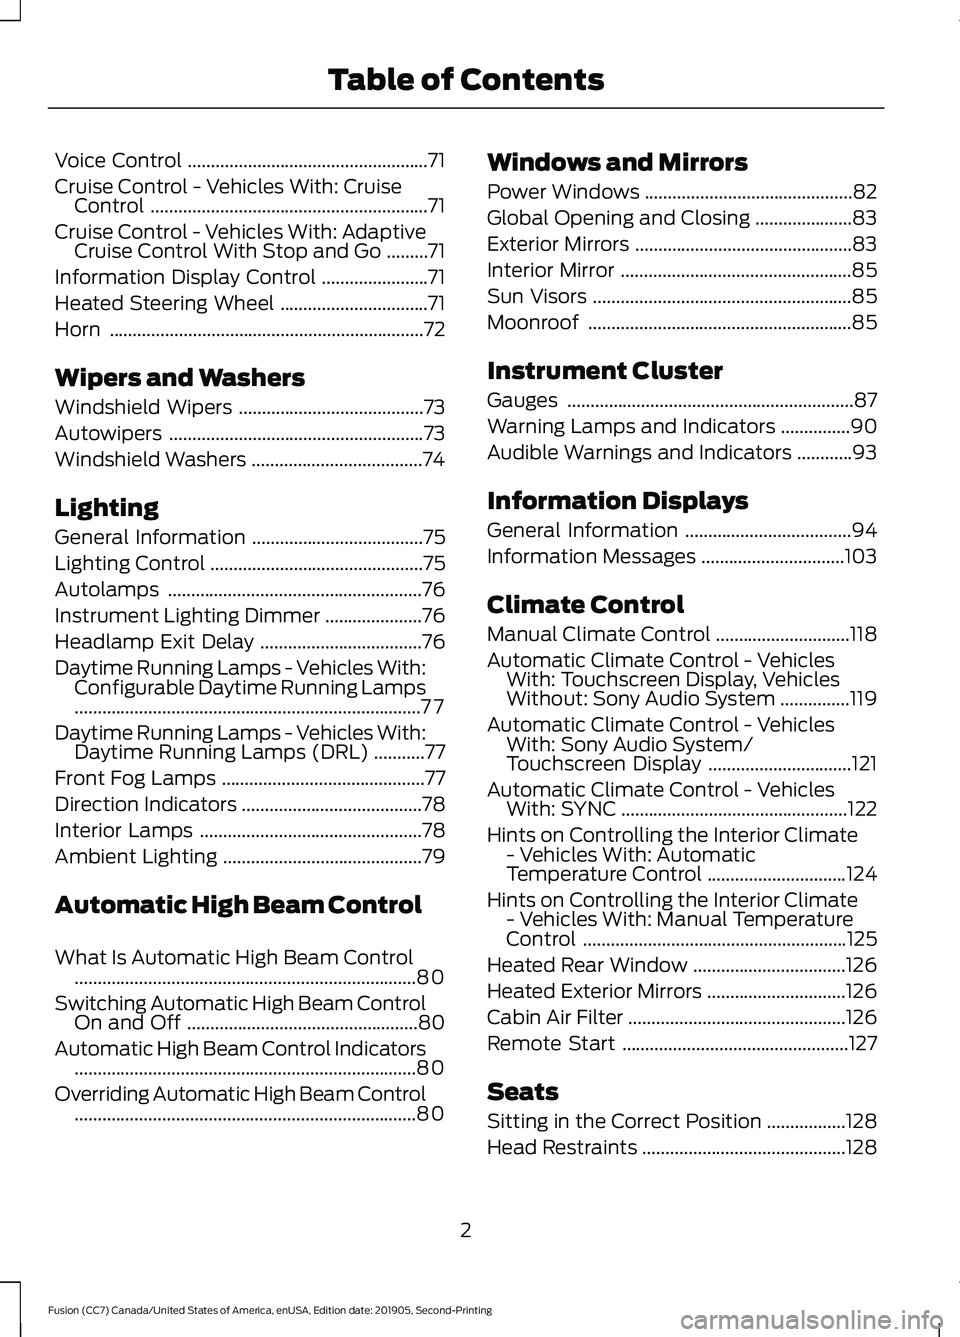 FORD FUSION 2020  Owners Manual Voice Control
....................................................71
Cruise Control - Vehicles With: Cruise Control ............................................................
71
Cruise Control - Veh